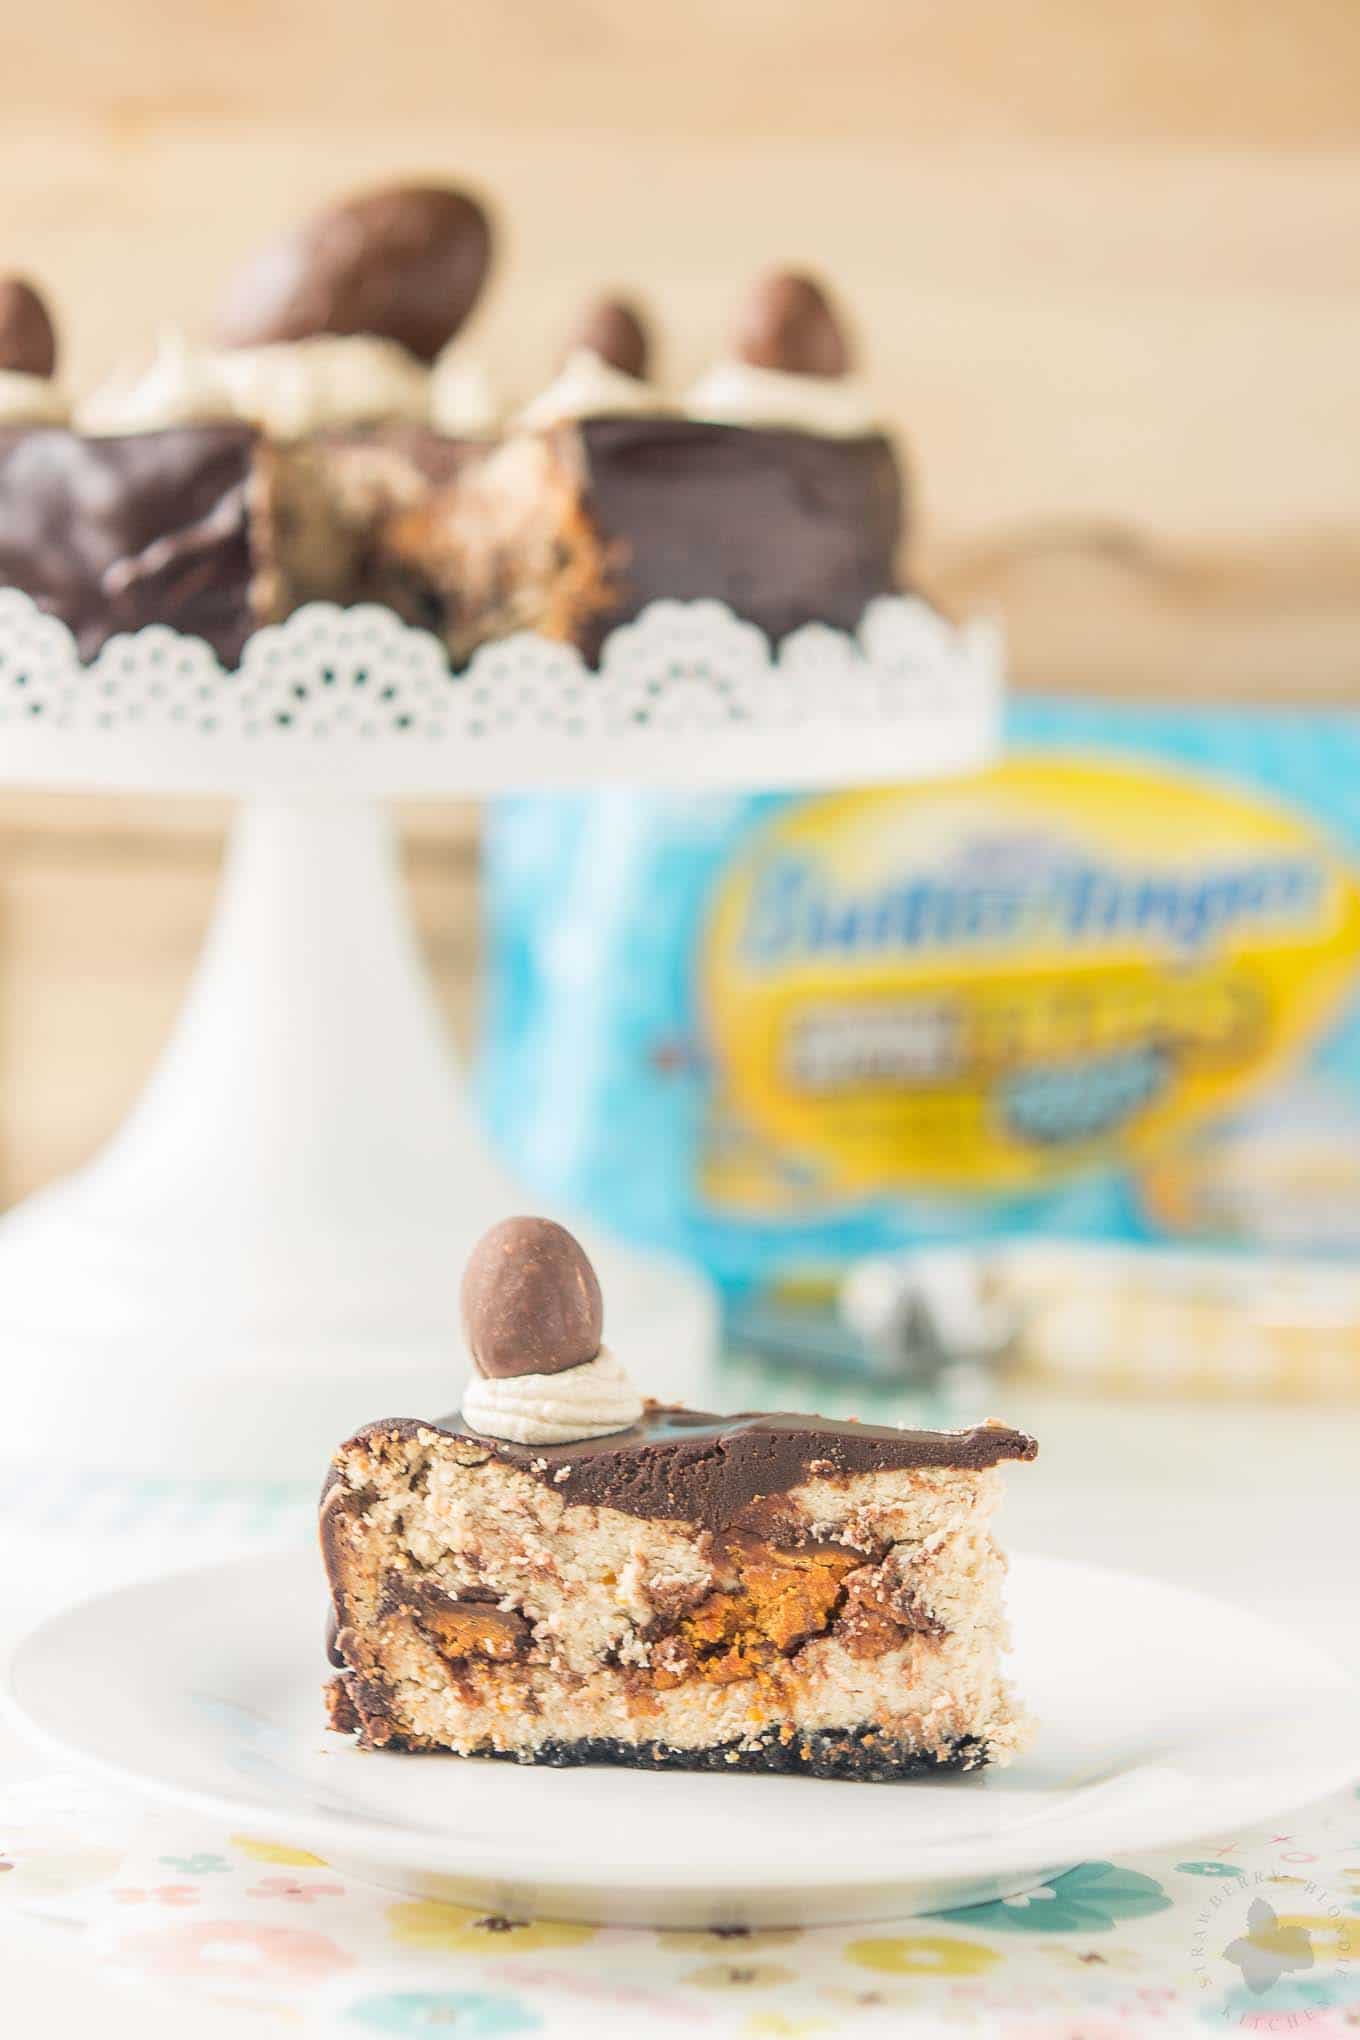 Layers of chocolate cookie crust, peanut butter cheesecake, BUTTERFINGER® Cup Eggs, chocolate ganache and peanut butter frosting, this BUTTERFINGER® Cheesecake Pie is a peanut butter lovers dream! | Strawberry Blondie Kitchen